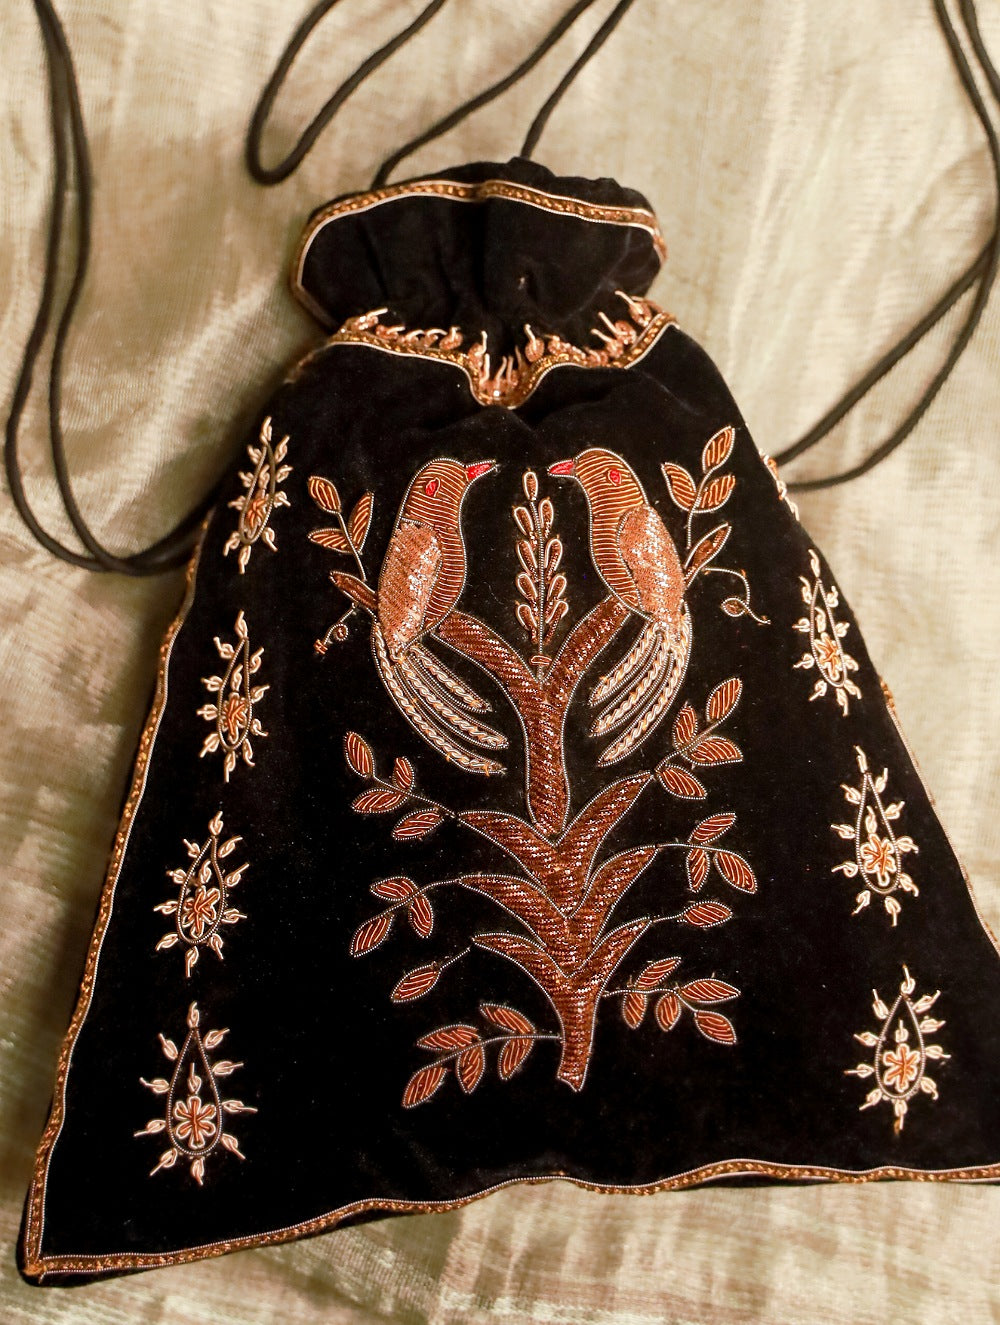 Load image into Gallery viewer, Zardozi and Resham Embroidered Evening Potli Bag - Black birds